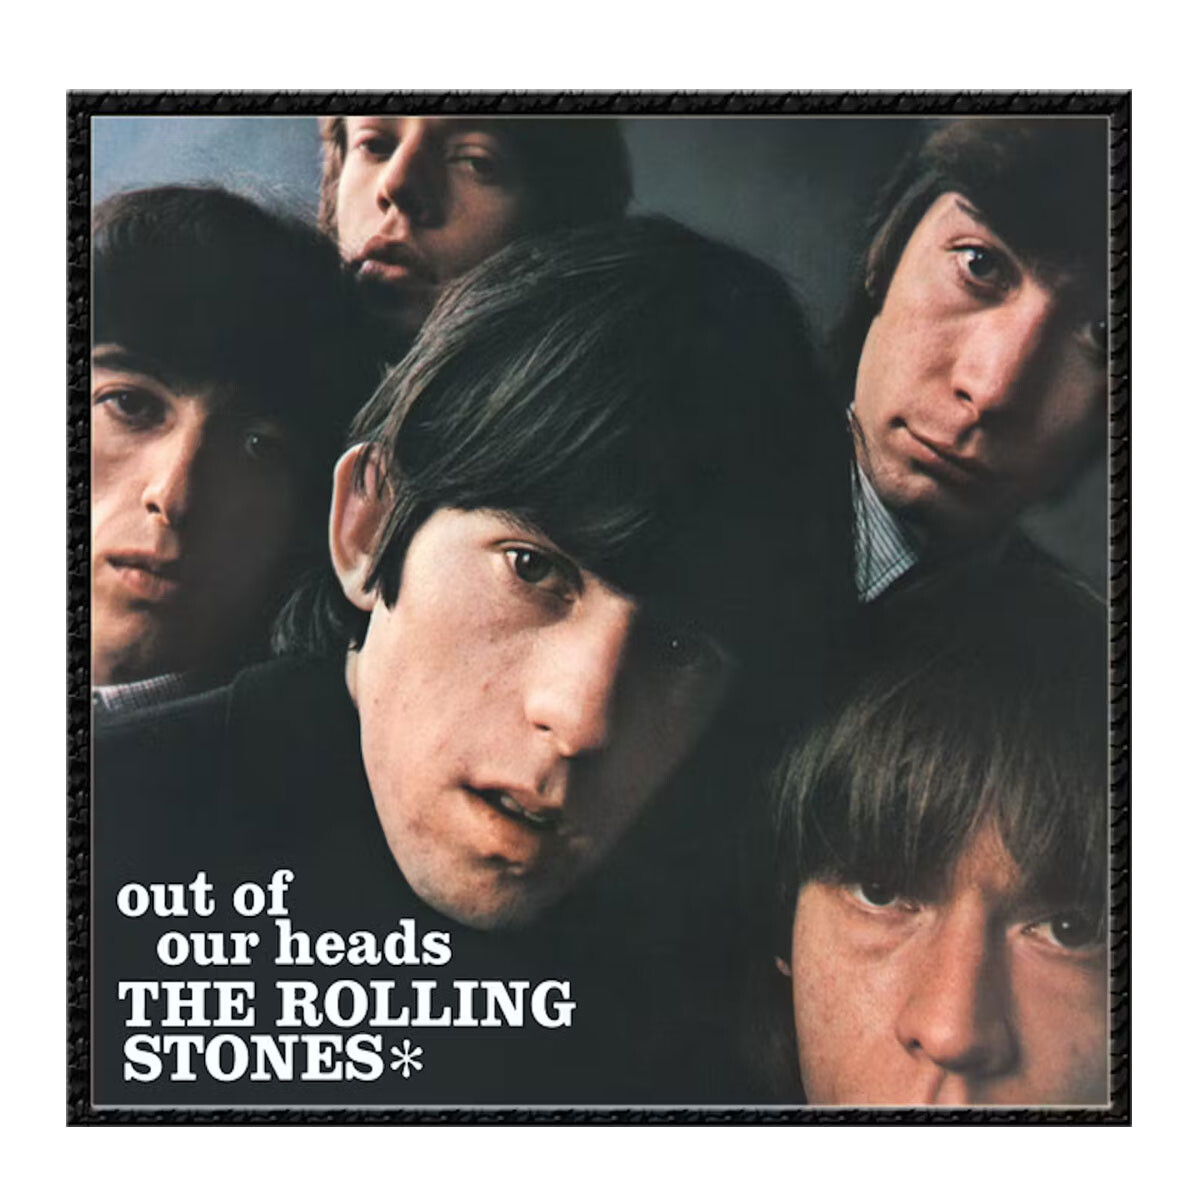 Rolling Stones / Out Of Our Heads (us) - Lp 